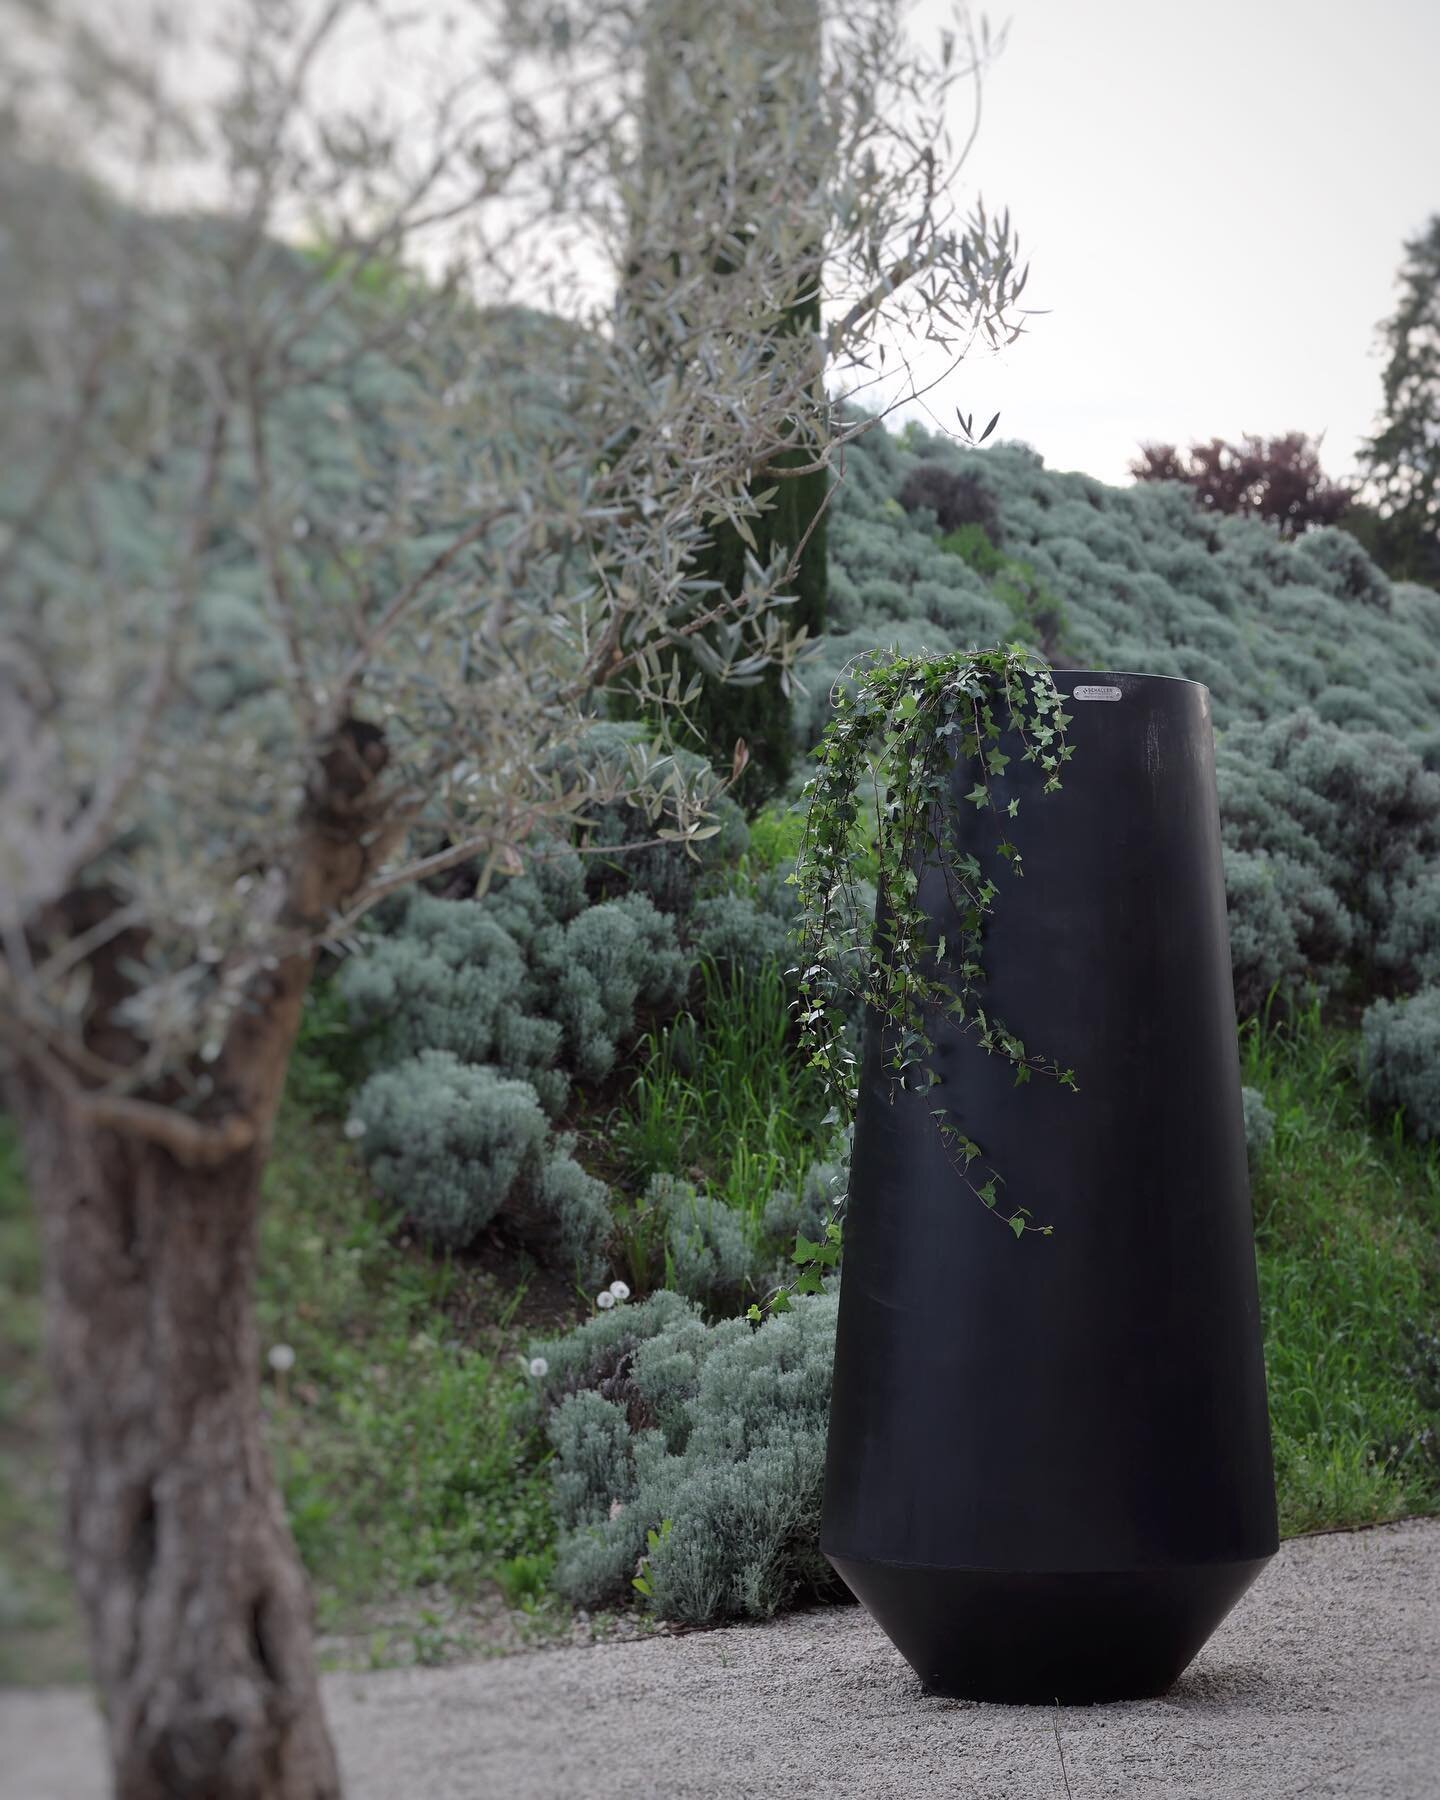 Galm ✨
&bull;
Last Thursday we launched the Signature edition with @schaller_sarl 
&bull;
My project &quot;Galm&quot; materializes a series of monumental planters. Between nature and artifact, these majestic monoliths dress outdoor spaces like sculpt